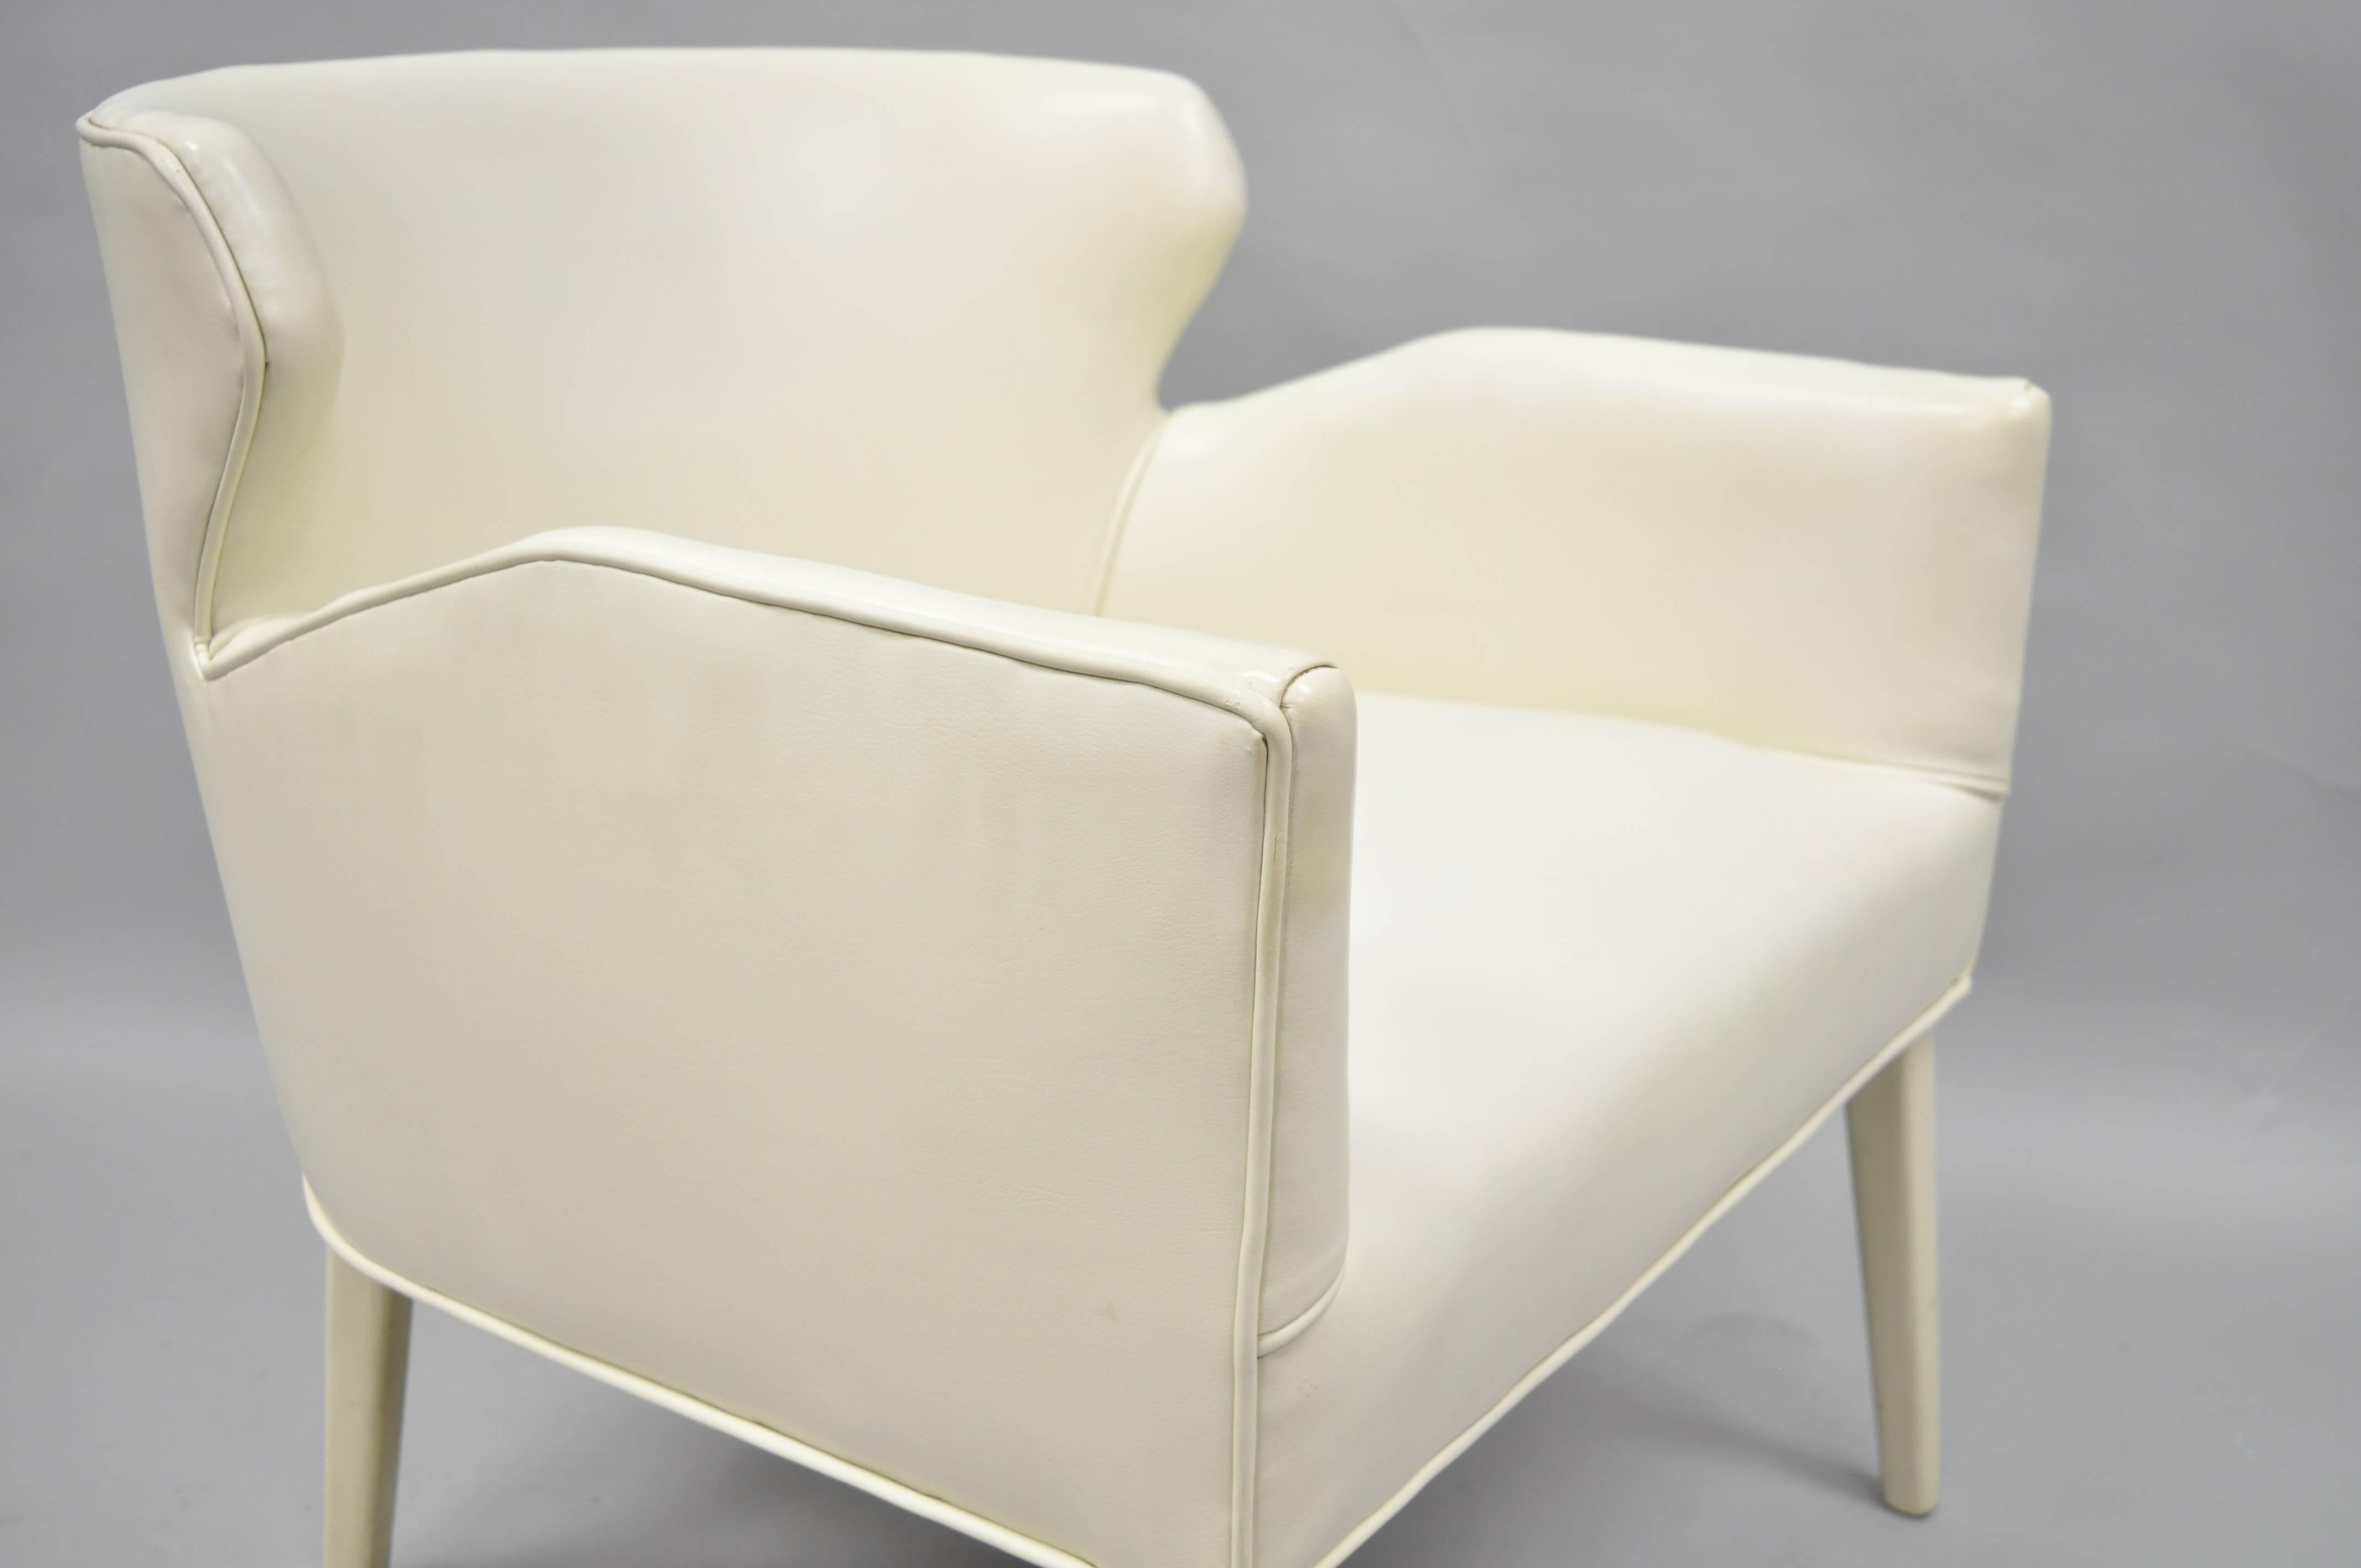 Upholstery Pair of Barrel Back Sculptural Off-White Vinyl Lounge Chairs After Paul McCobb